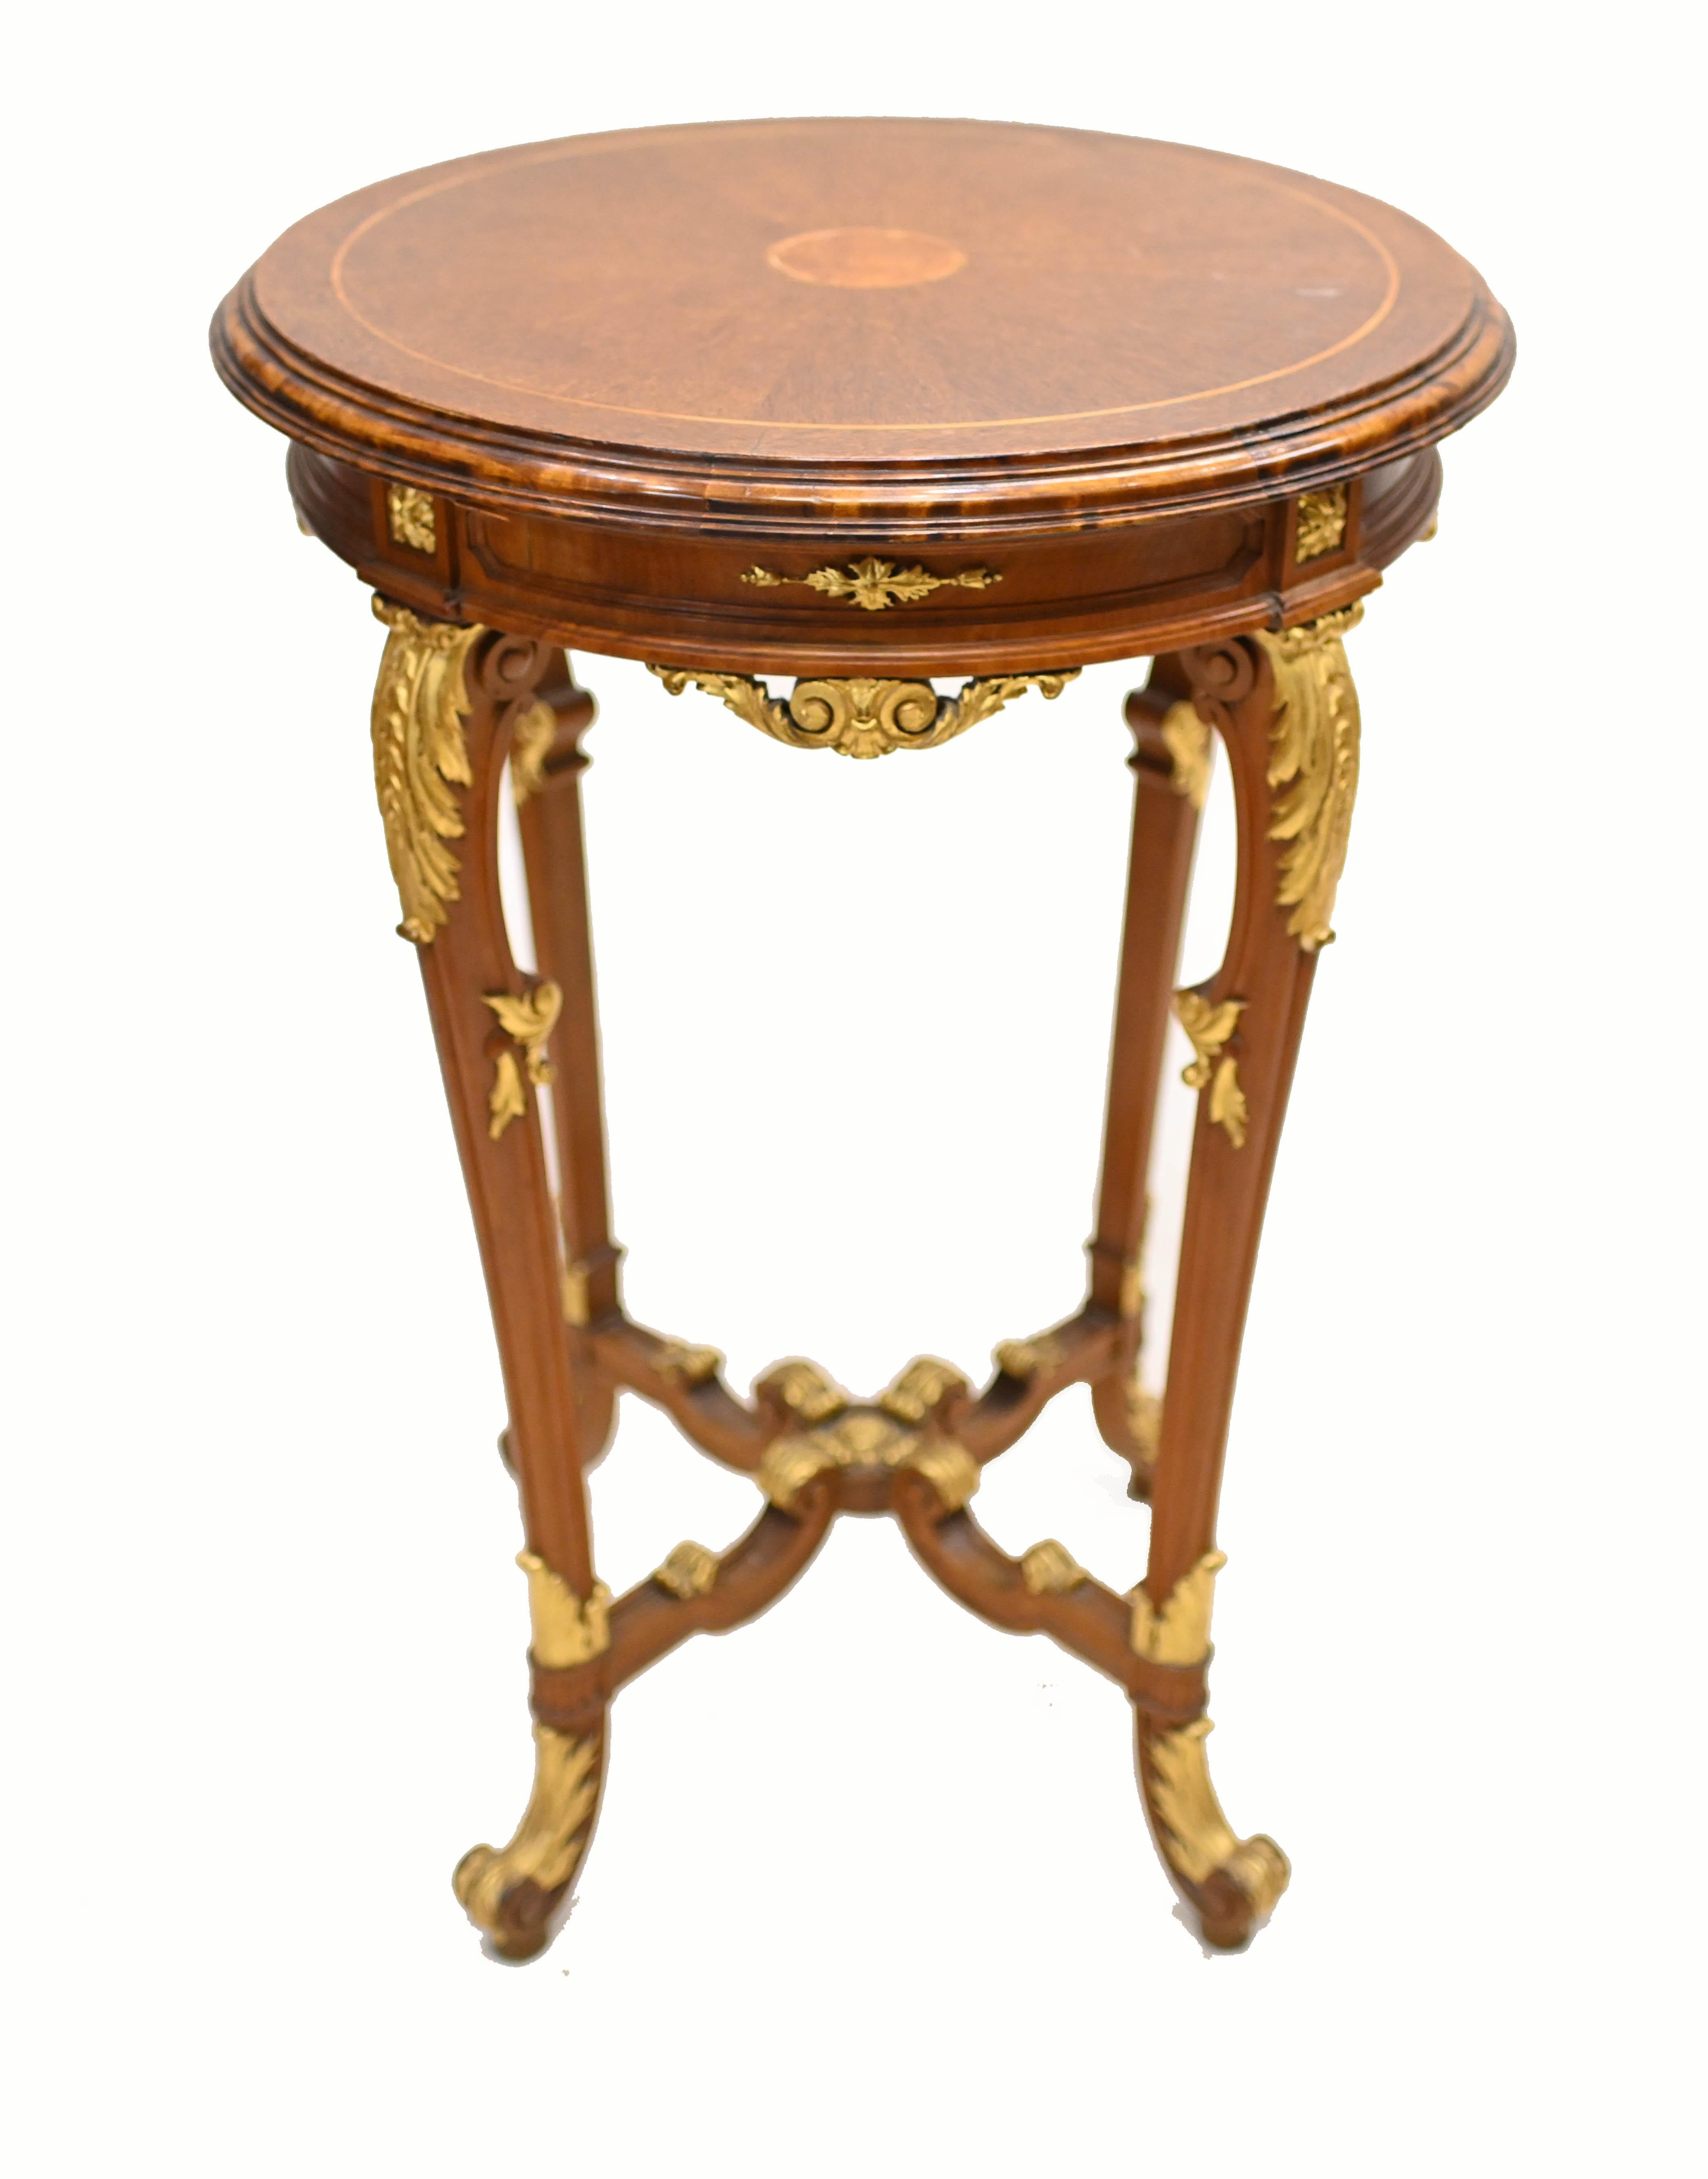 A French side table in kingwood with fine quality applied ormolu gilded mounts
Round top with concentric designs and woods
Circa 1890
Bought from a dealer on Marche Biron at Paris antiques markets
Viewings available by appointment
Offered in great